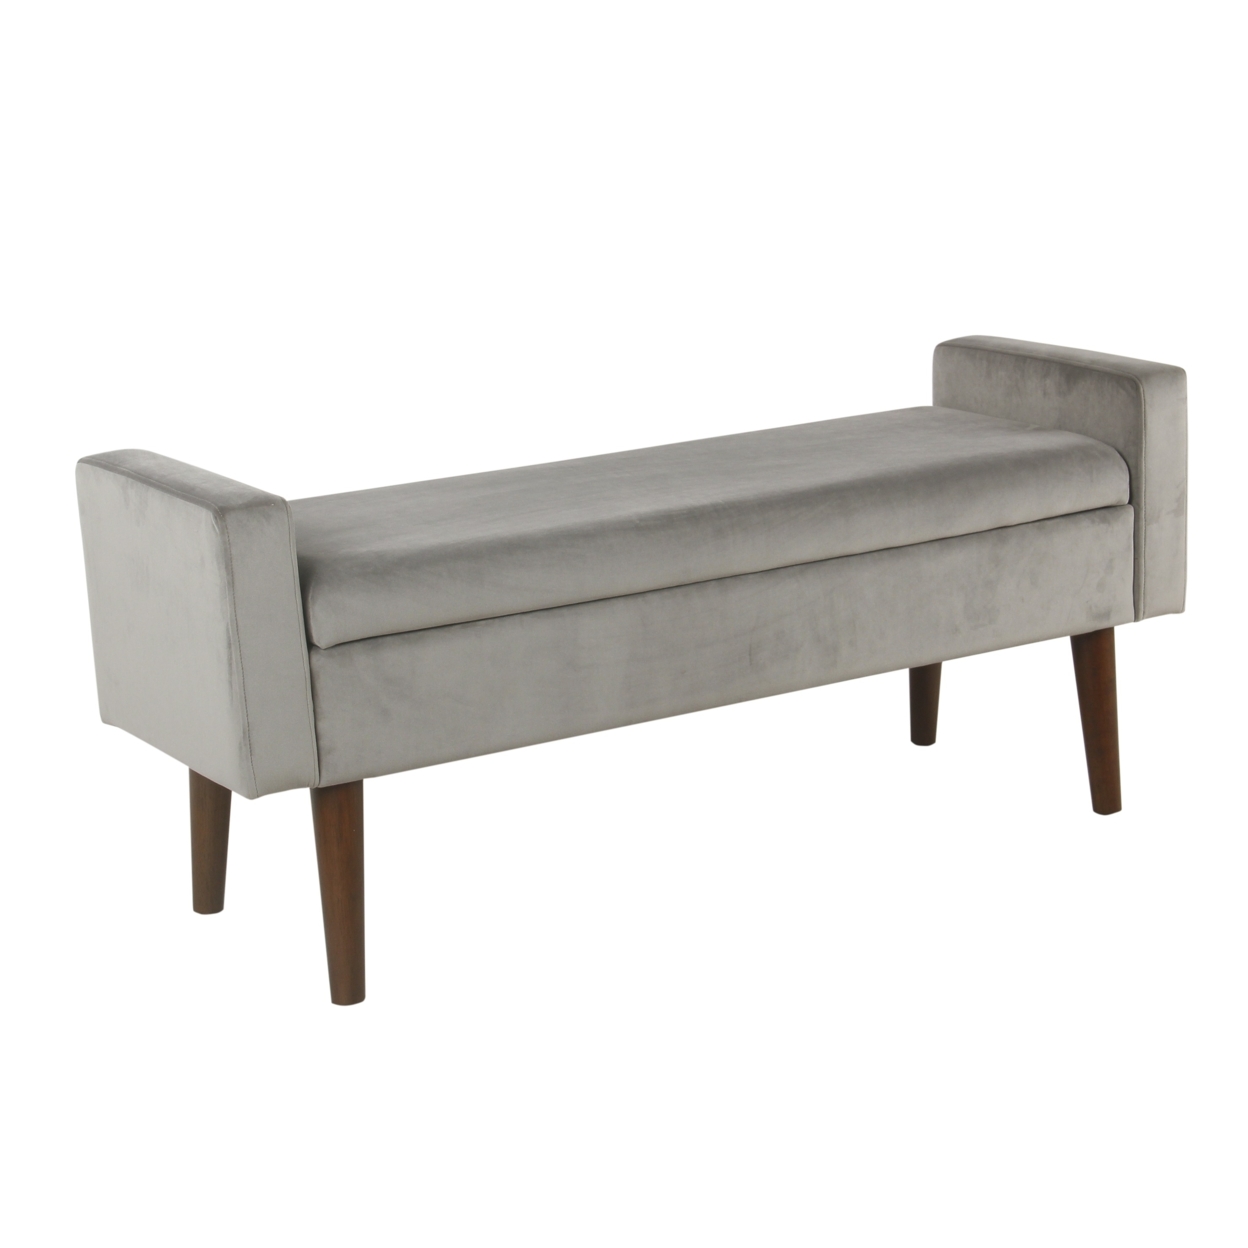 Velvet Upholstered Wooden Bench With Lift Top Storage And Tapered Feet, Gray- Saltoro Sherpi